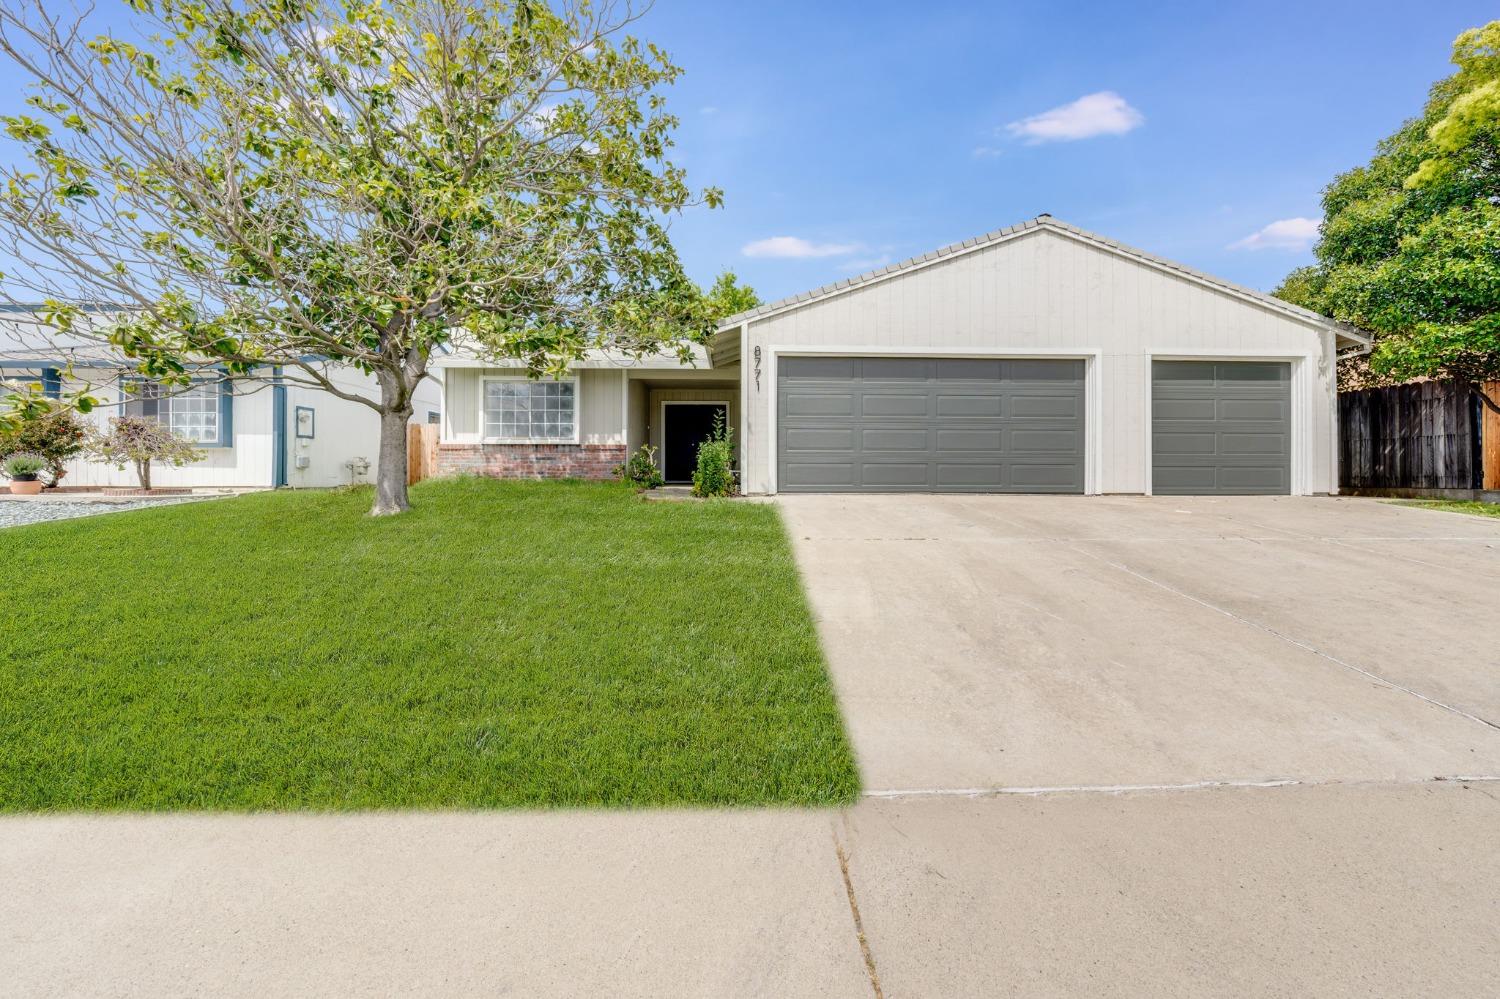 Situated in a highly coveted Sacramento neighborhood and within the Elk Grove School District, this 